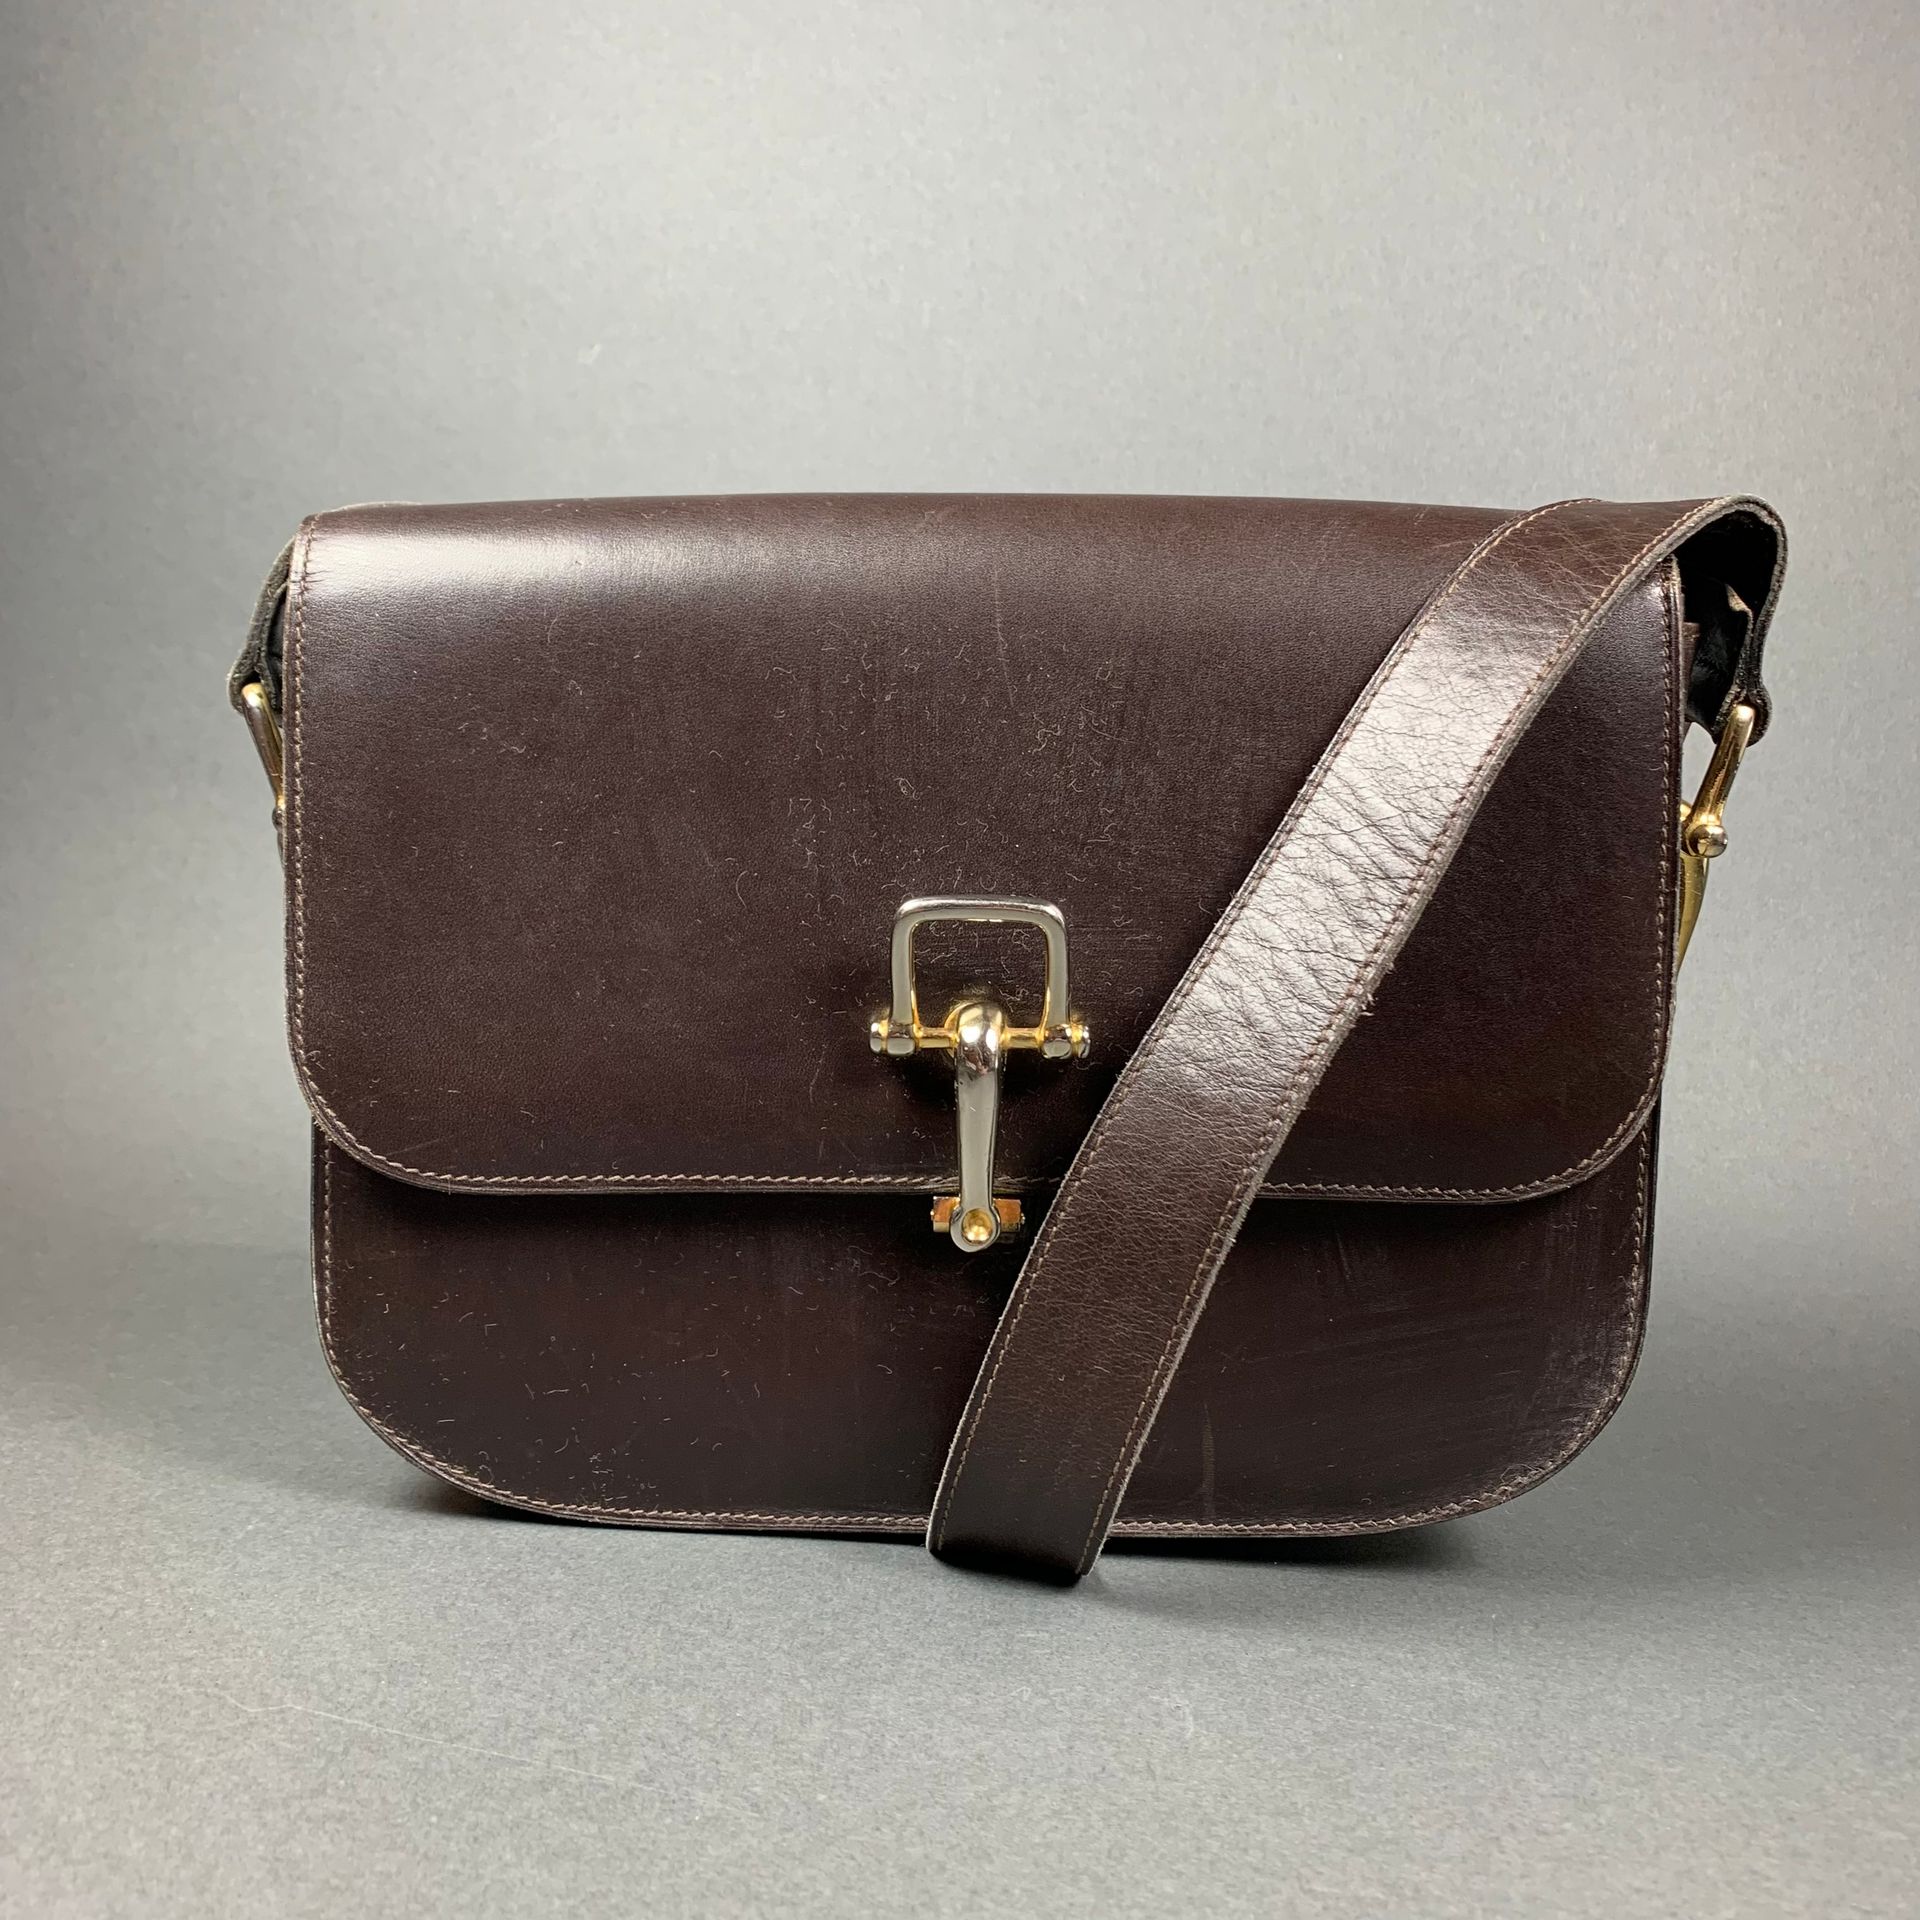 Sac CELINE in smooth dark brown leather, gold trim, flap pocket with clasp revea&hellip;